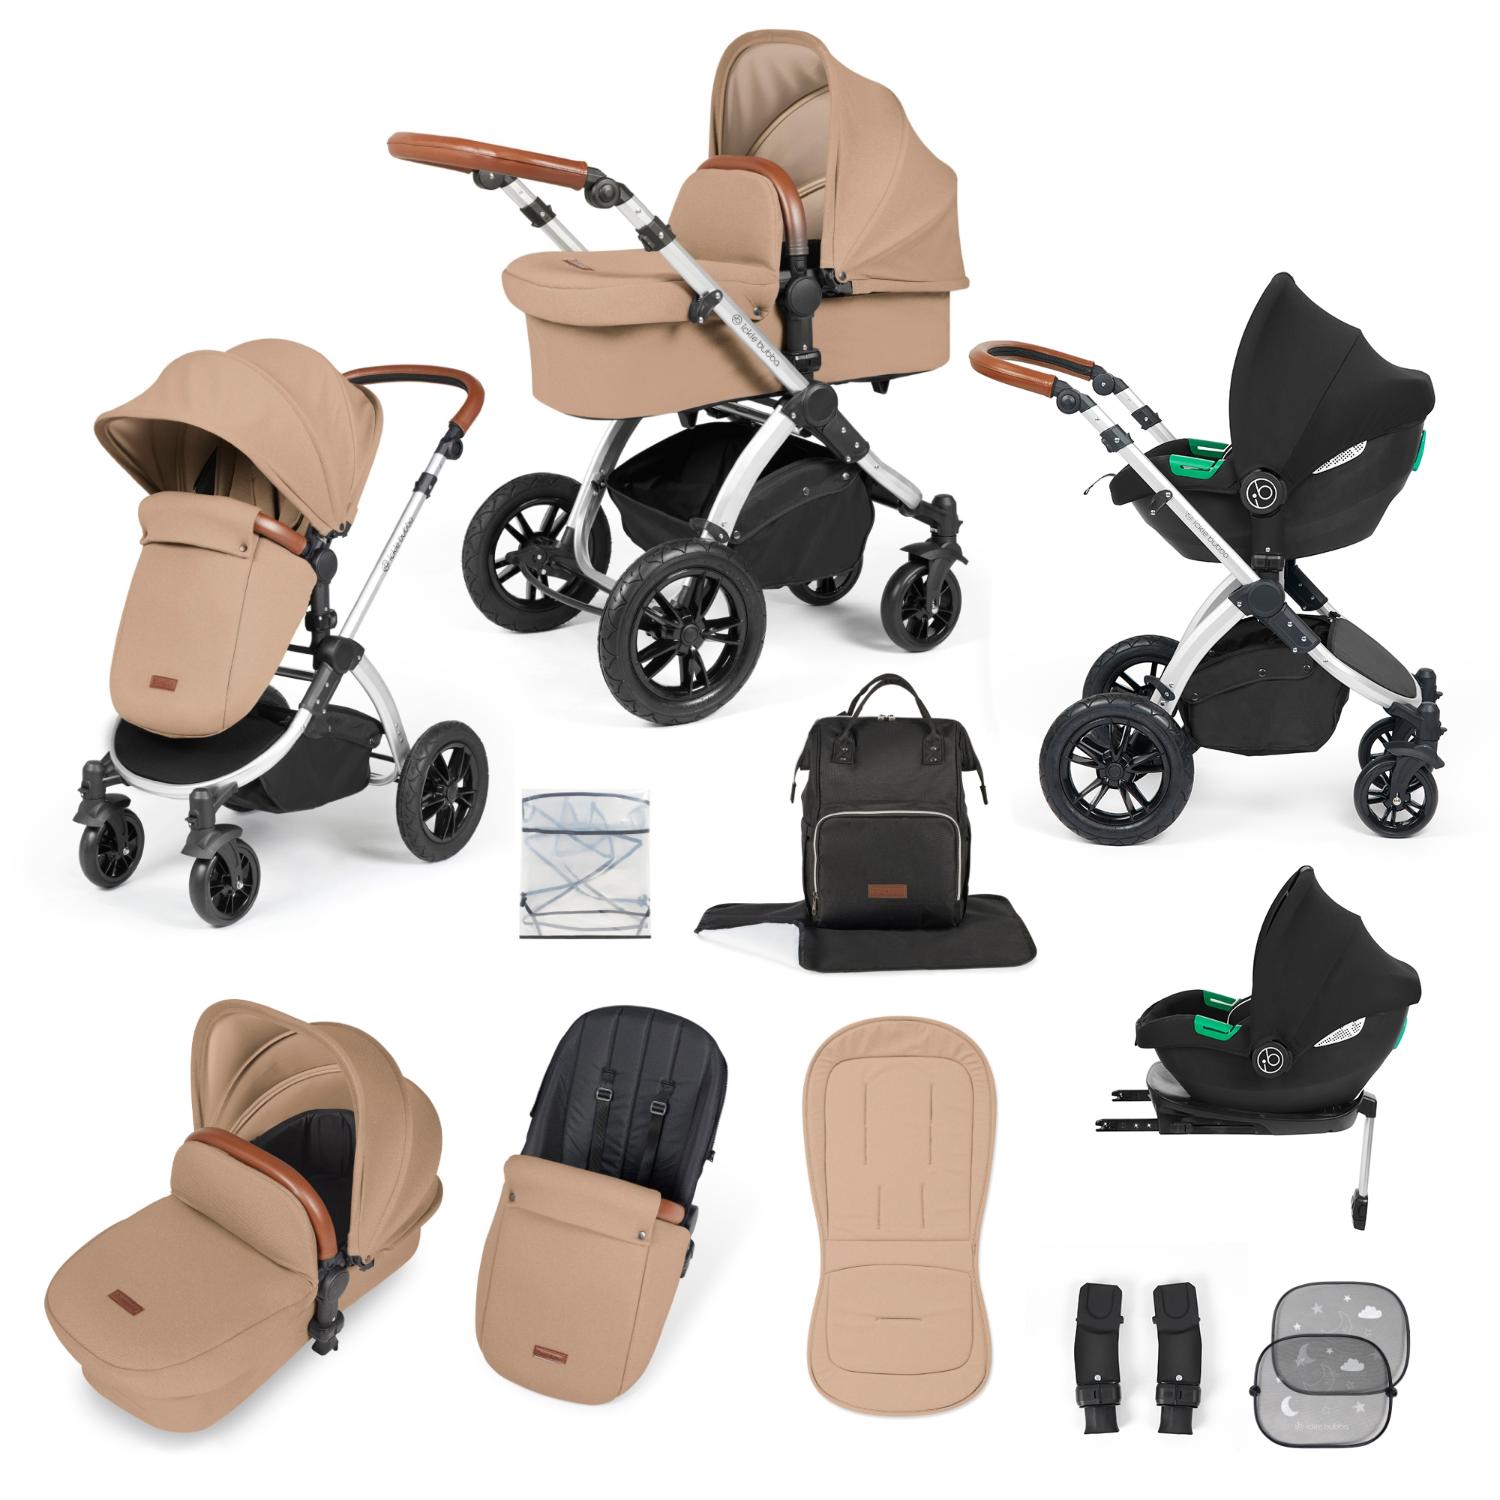 Ickle Bubba Stomp Luxe All-in-One Travel System with Cirrus i-Size Car Seat and ISOFIX Base and accessories in Desert beige colour with silver chassis and tan handle